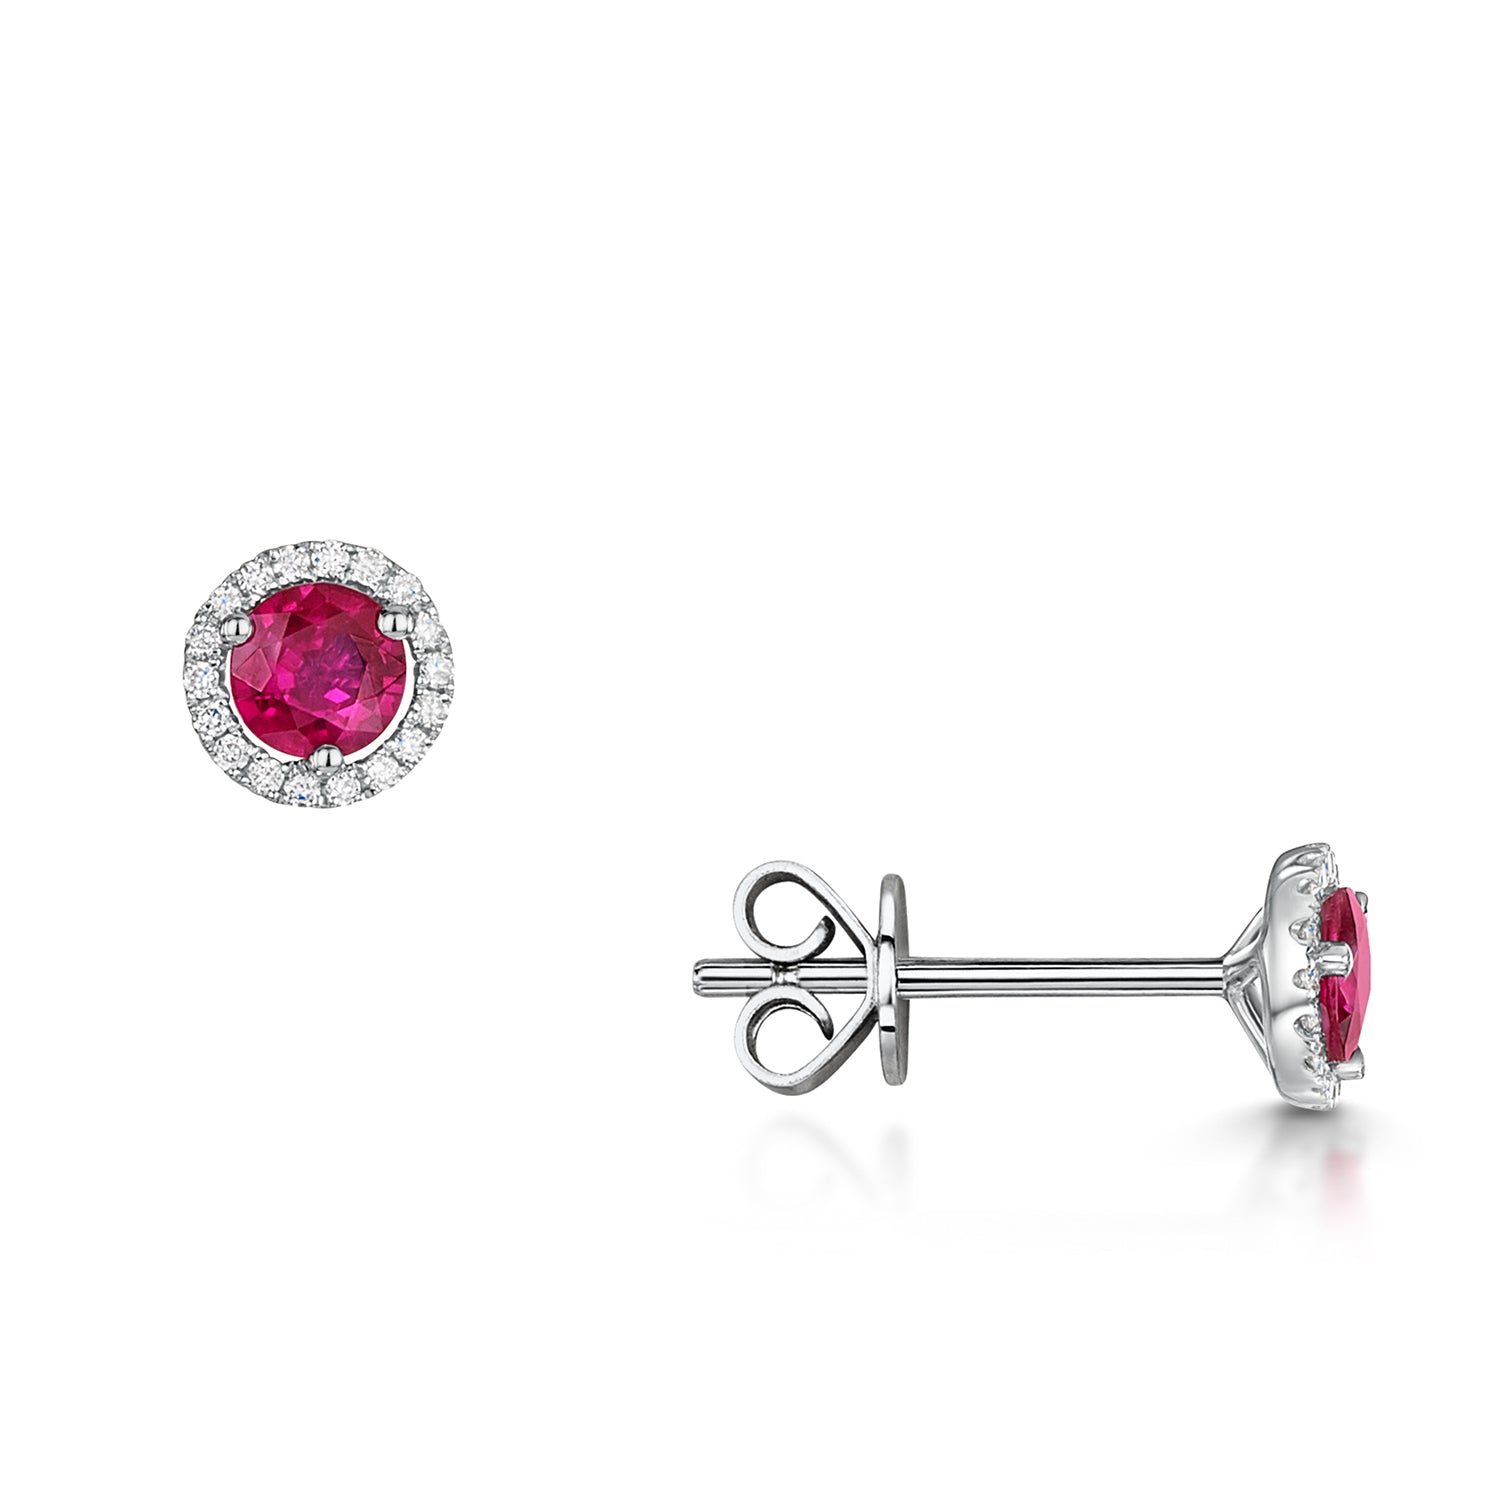 18ct White Gold Round Ruby And Diamond Cluster Stud Earrings